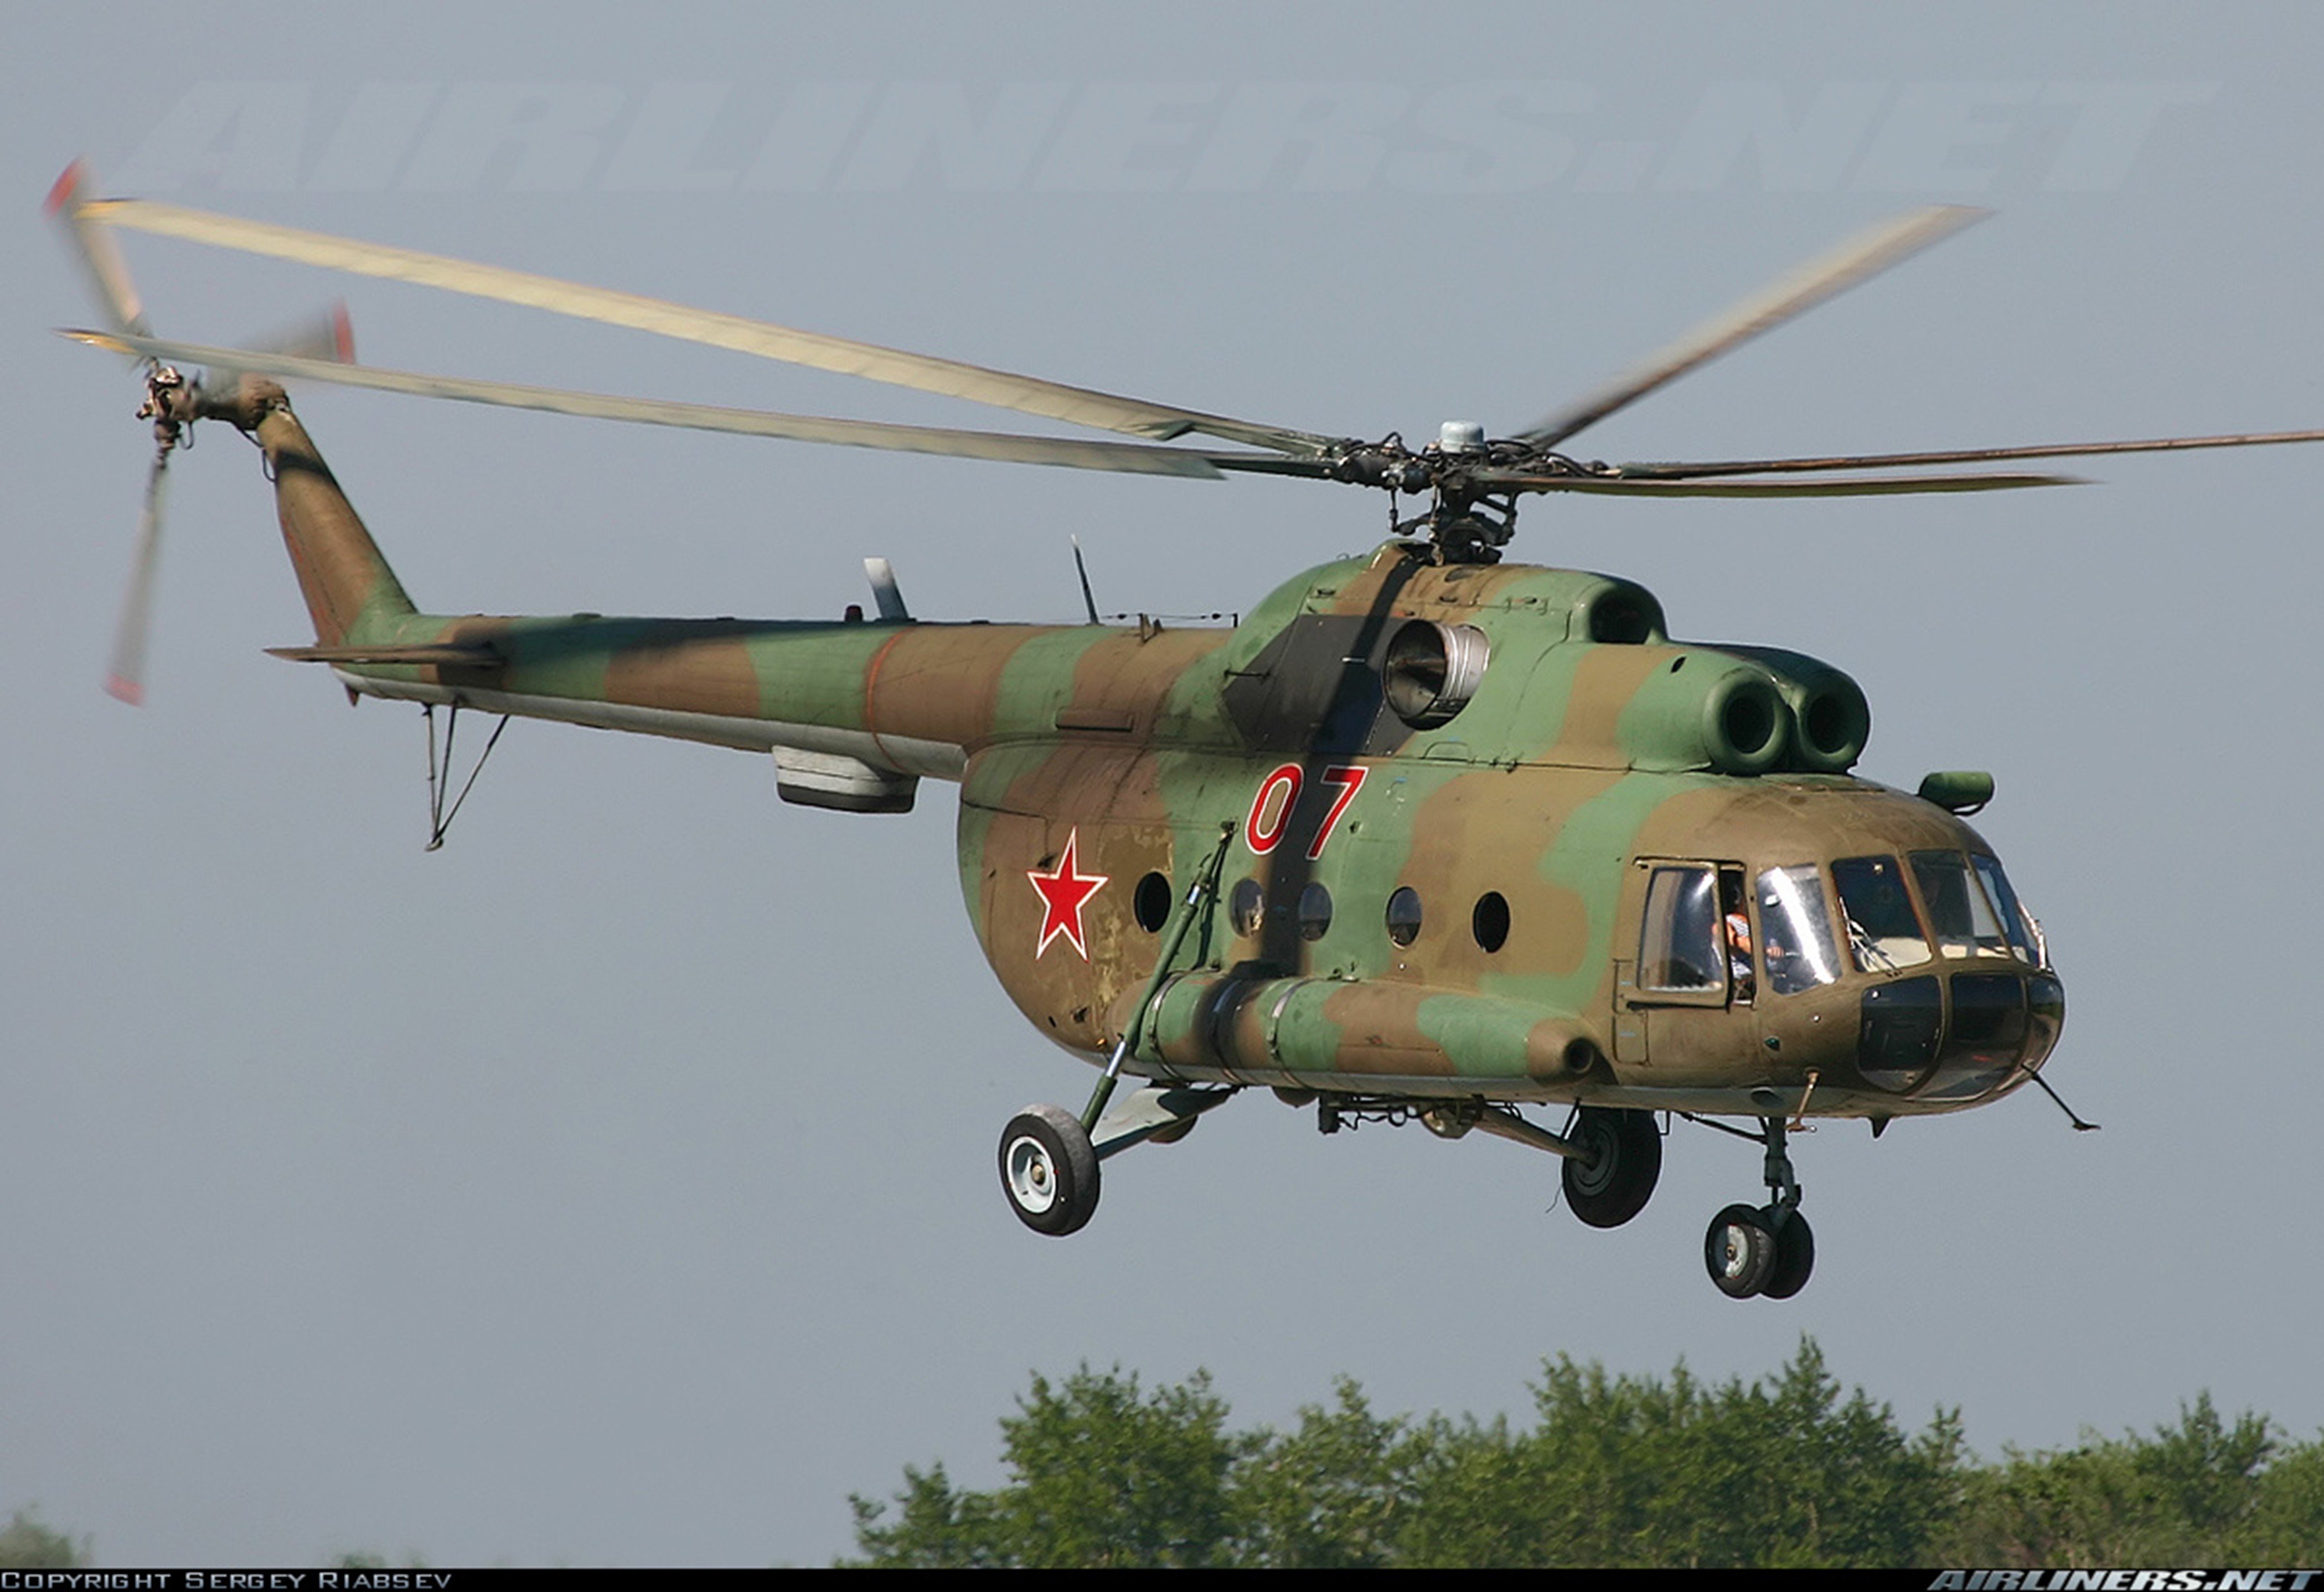 Russian Red Star Russia Helicopter Aircraft Vehicle Military Army ...